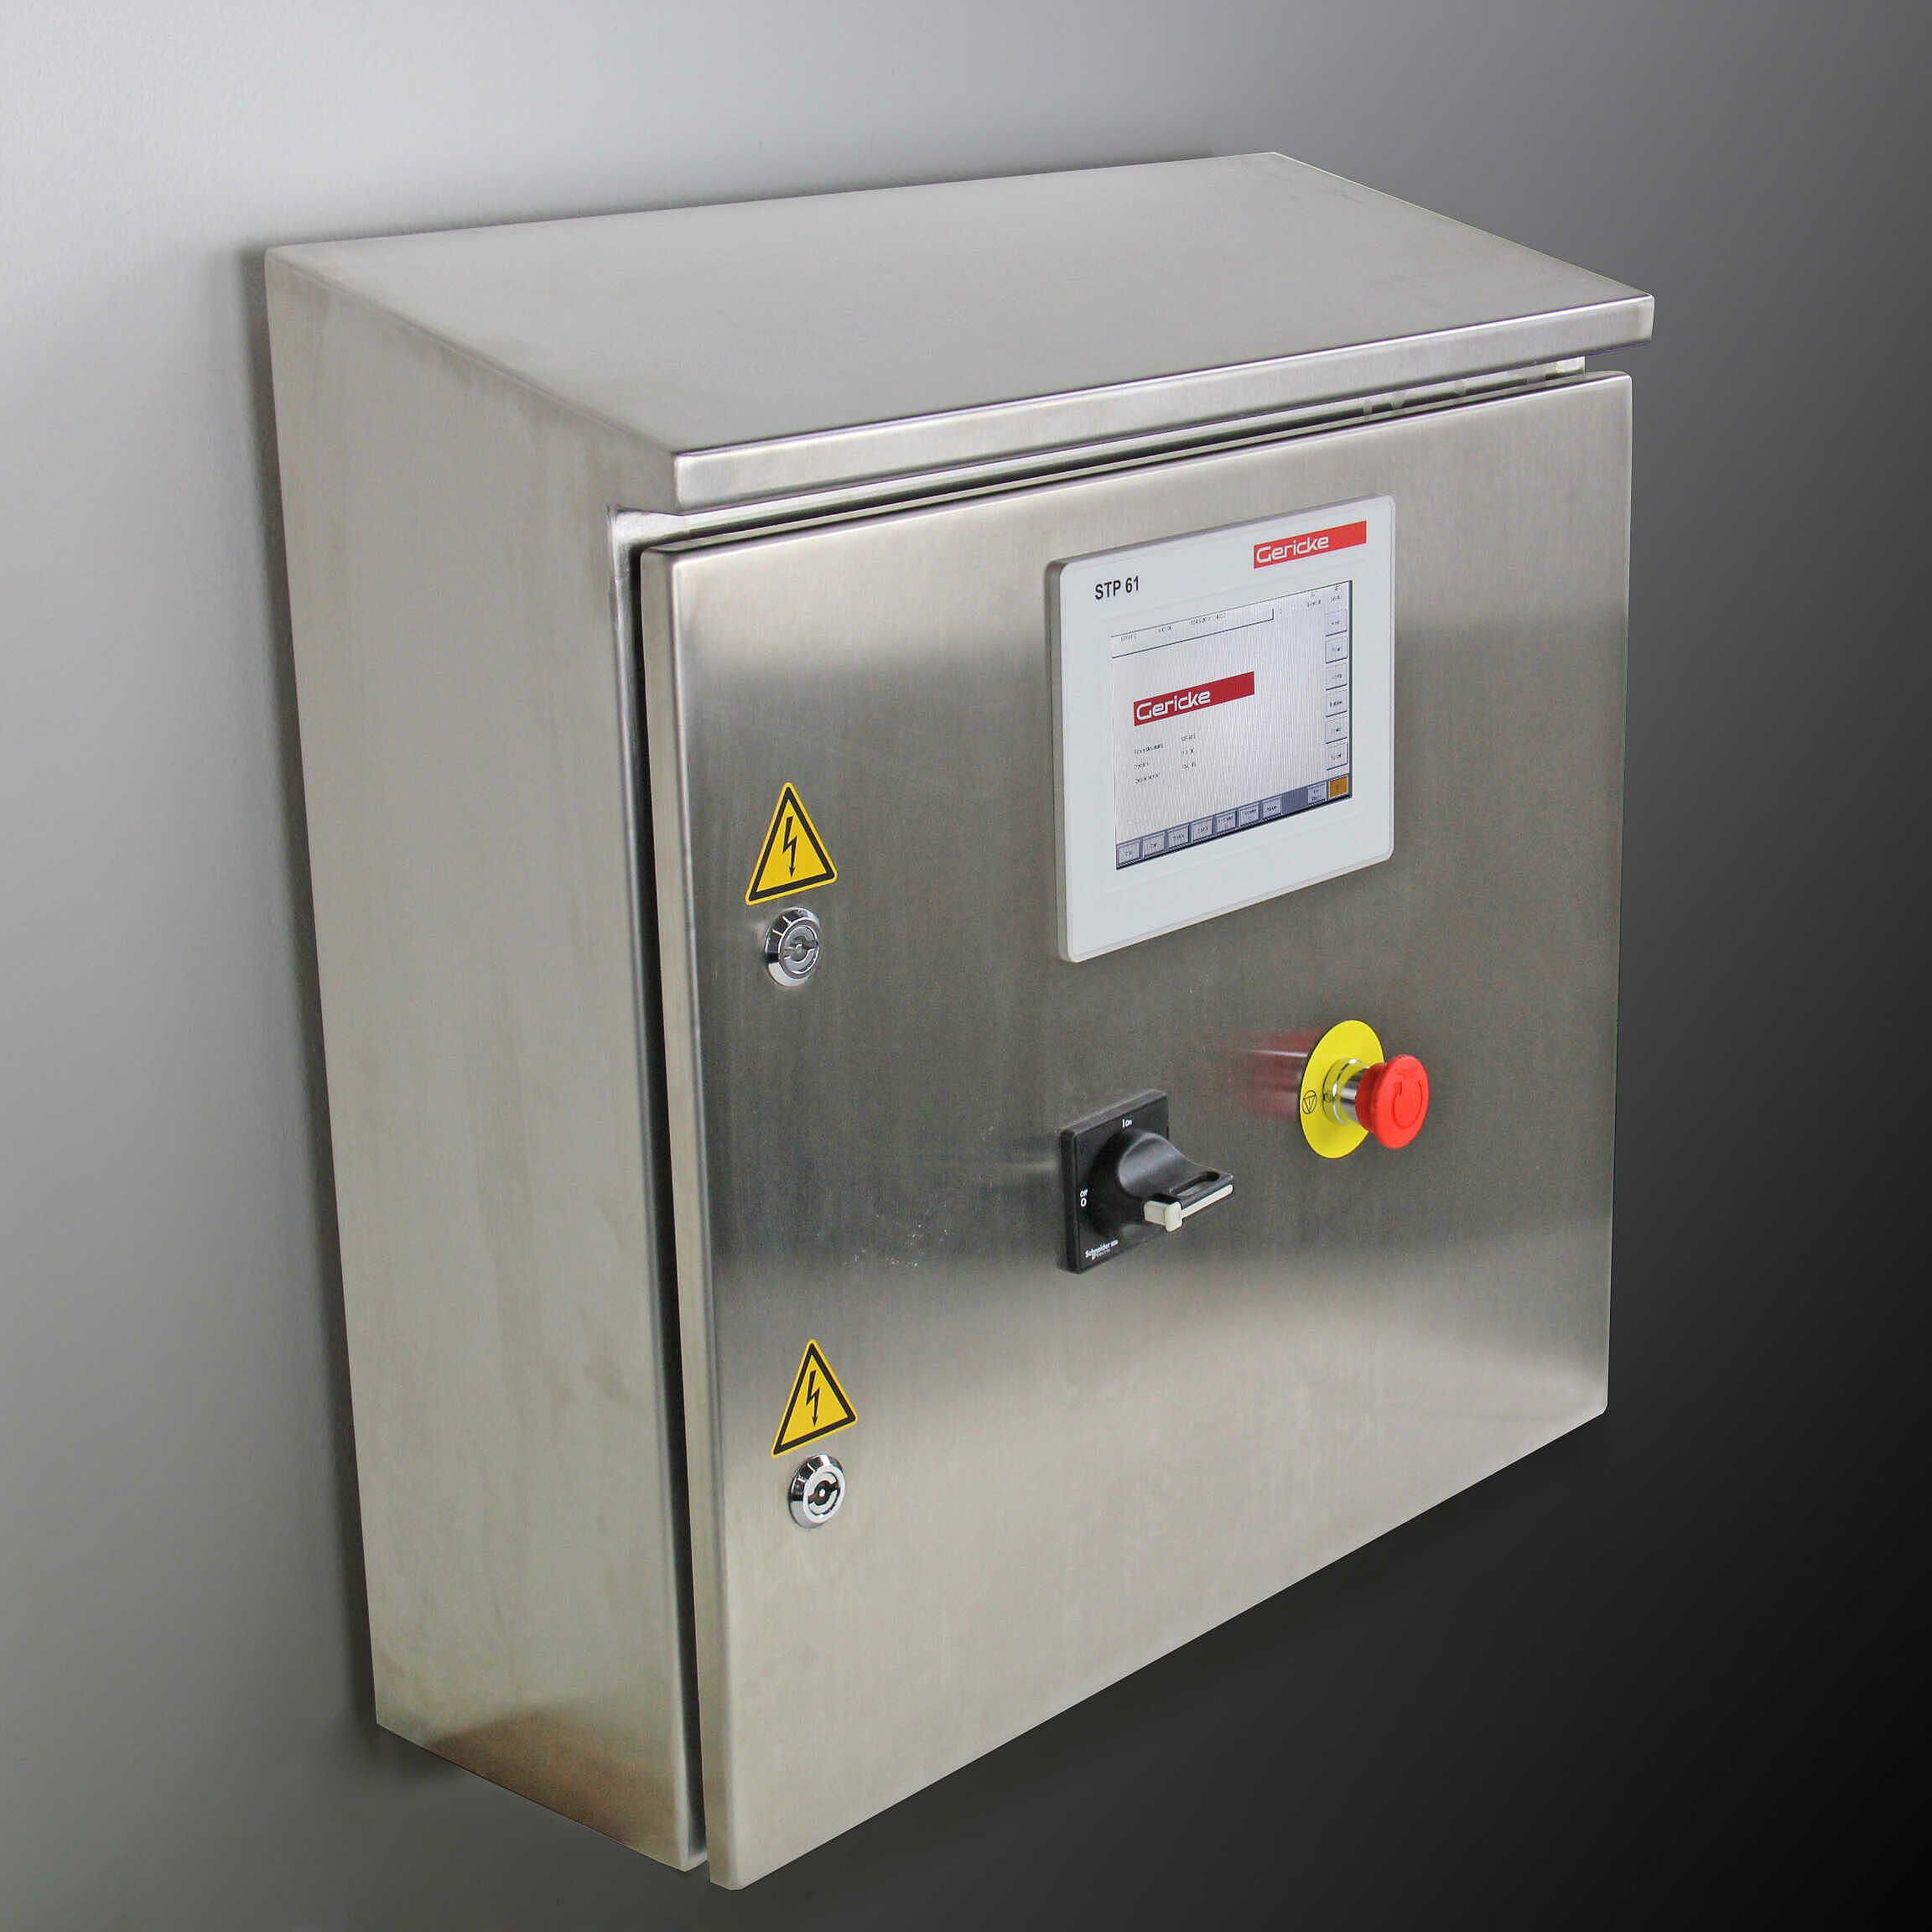 Controller in stainless steel cabinet